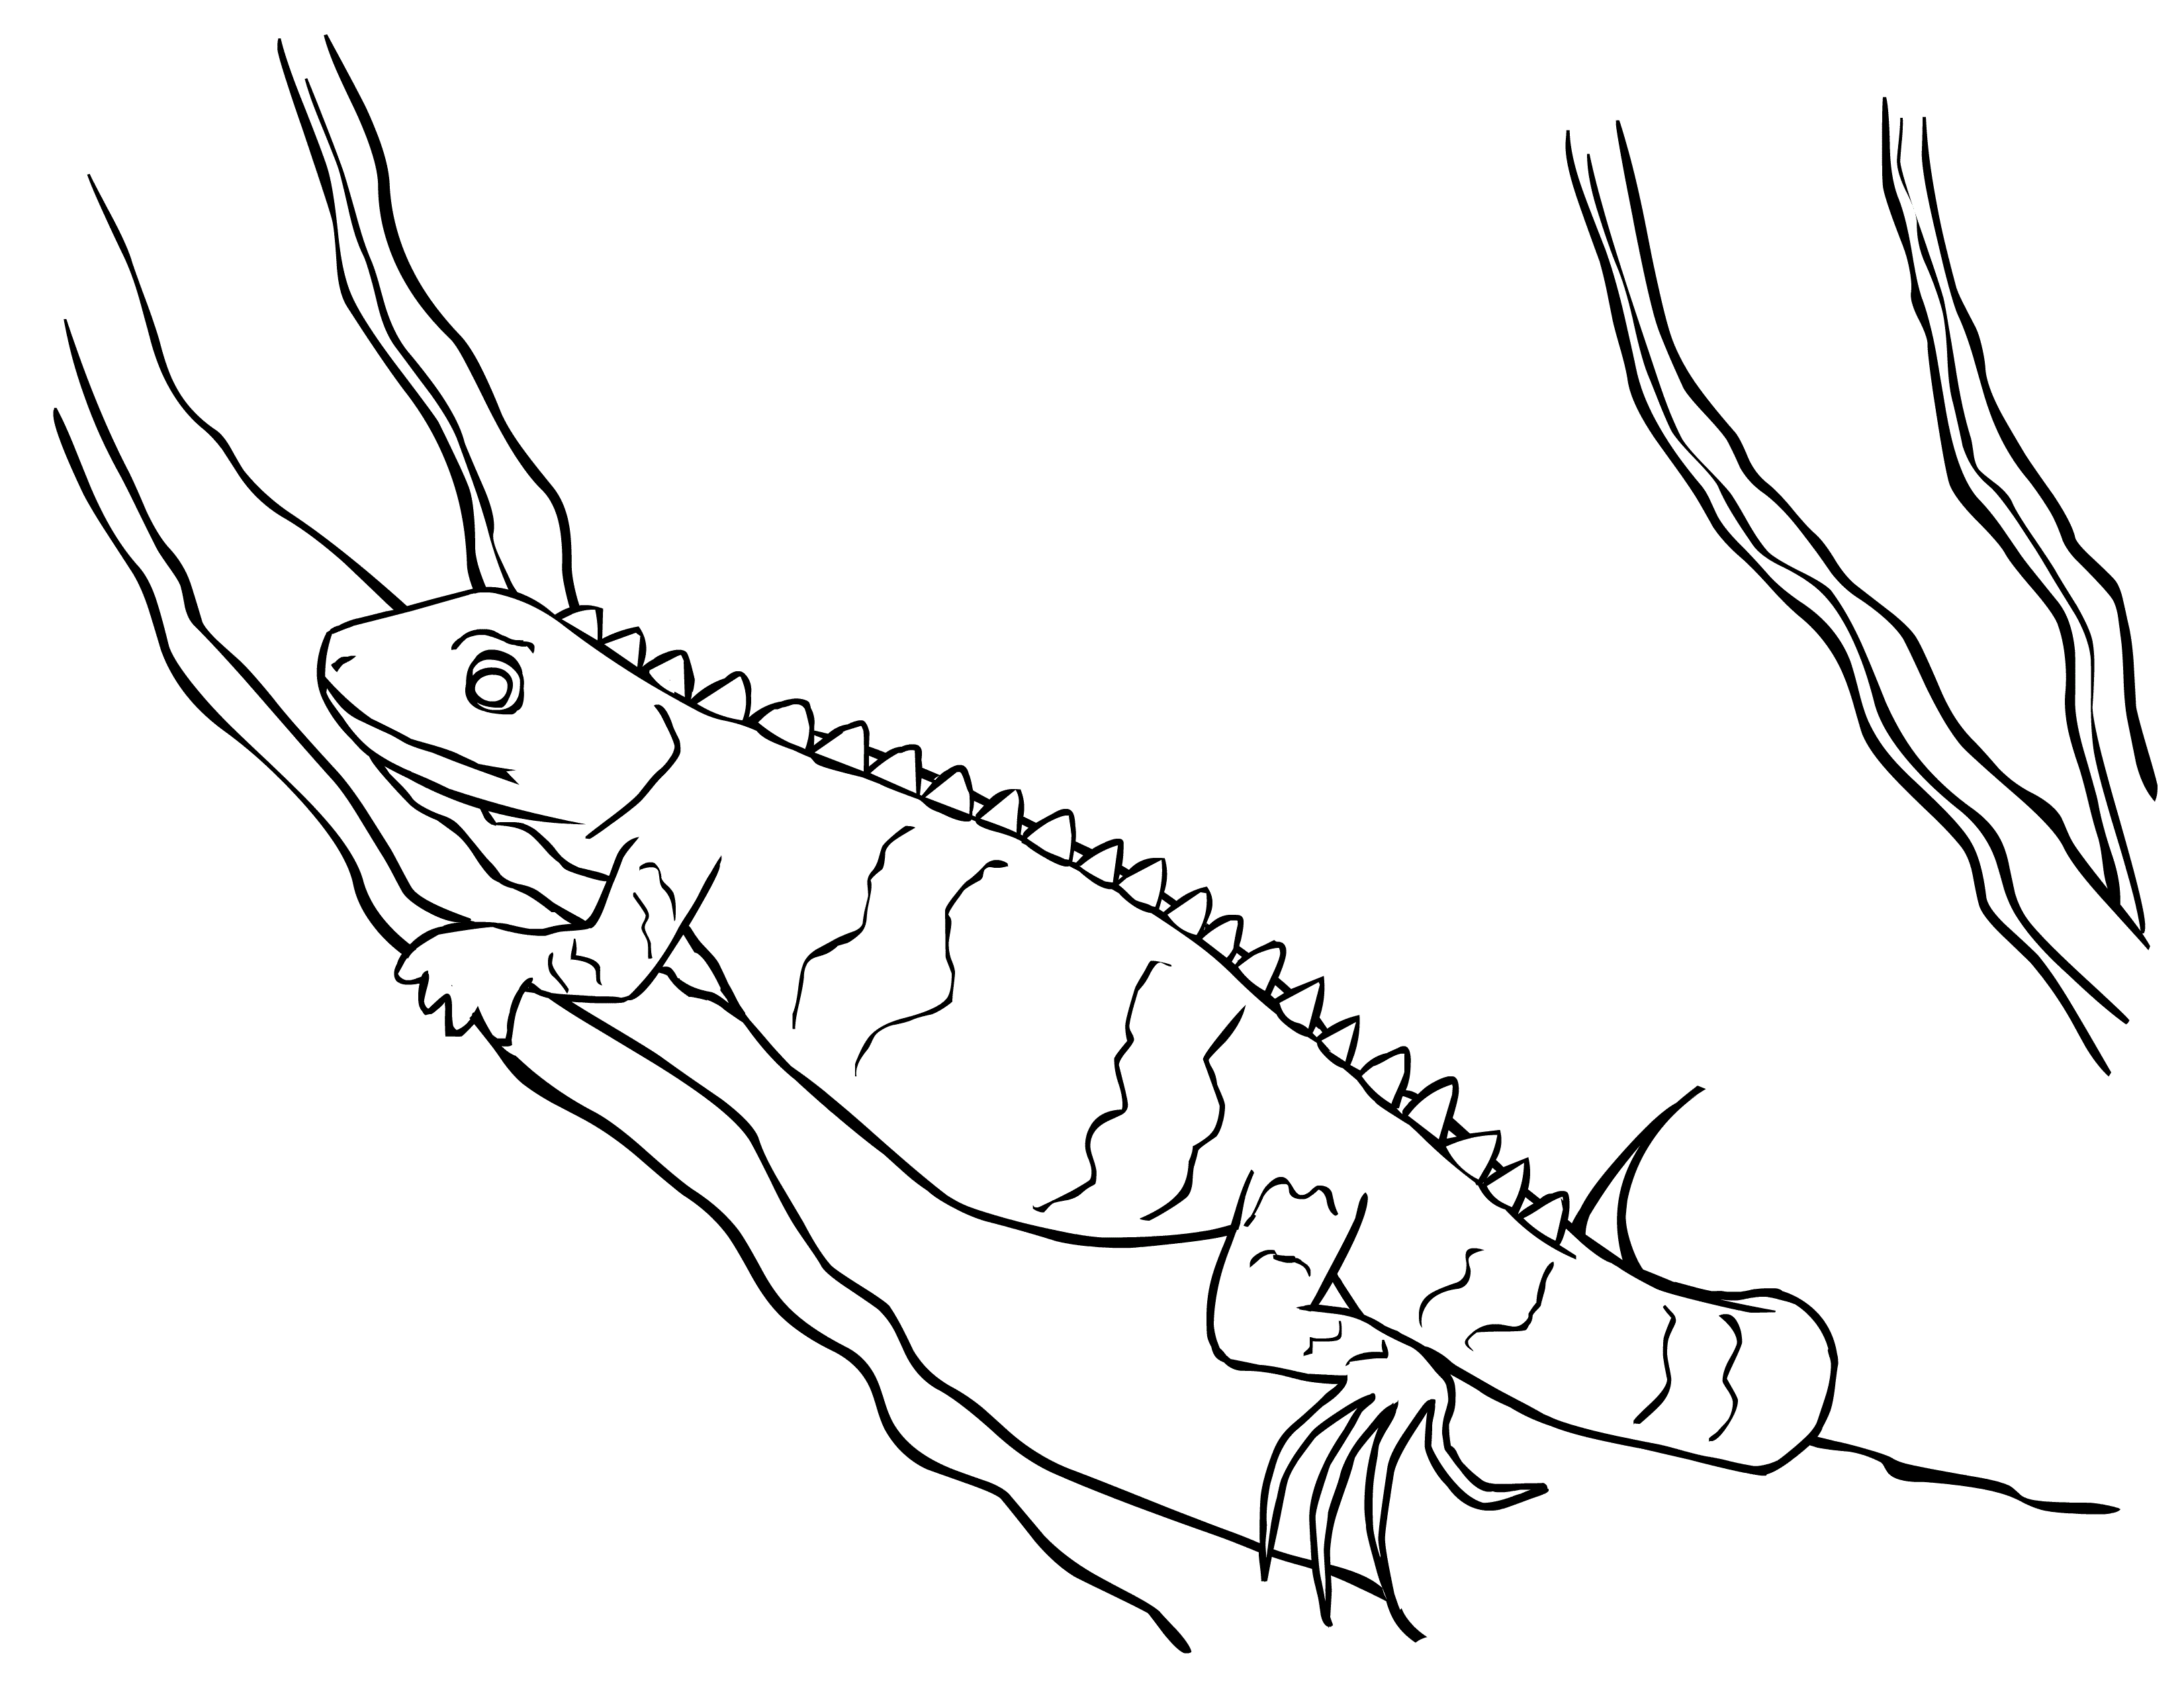 iguana coloring page iguana coloring pages getcoloringpagescom iguana page coloring 